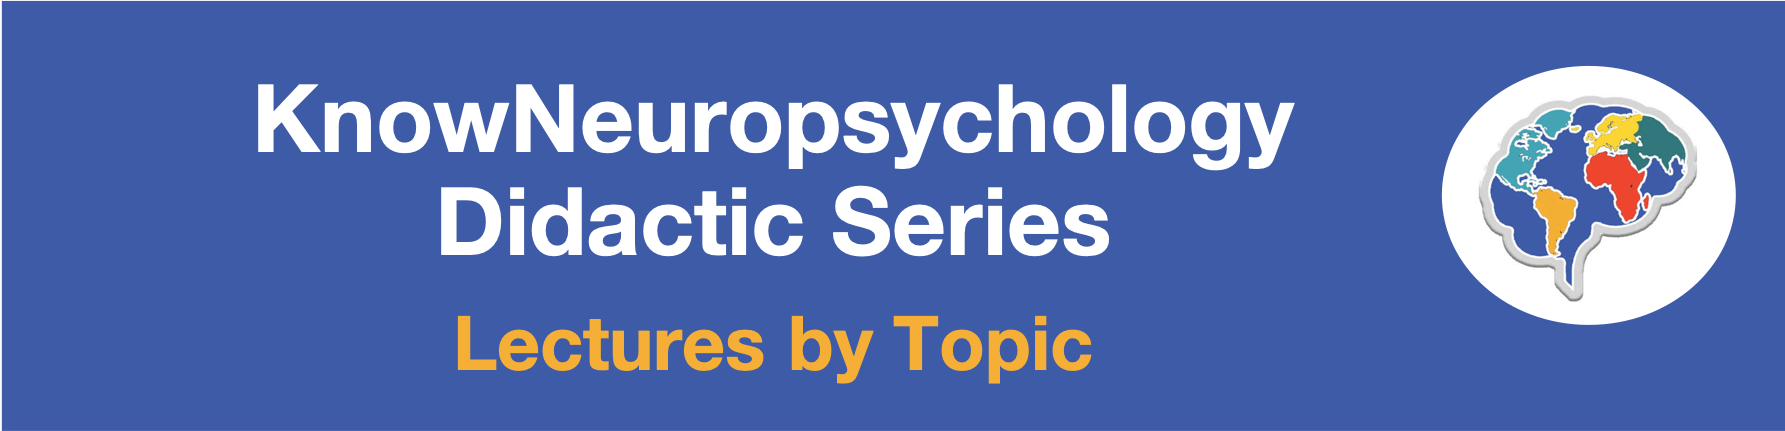 KnowNeuropsychology Didactic Series Lectures by Topic